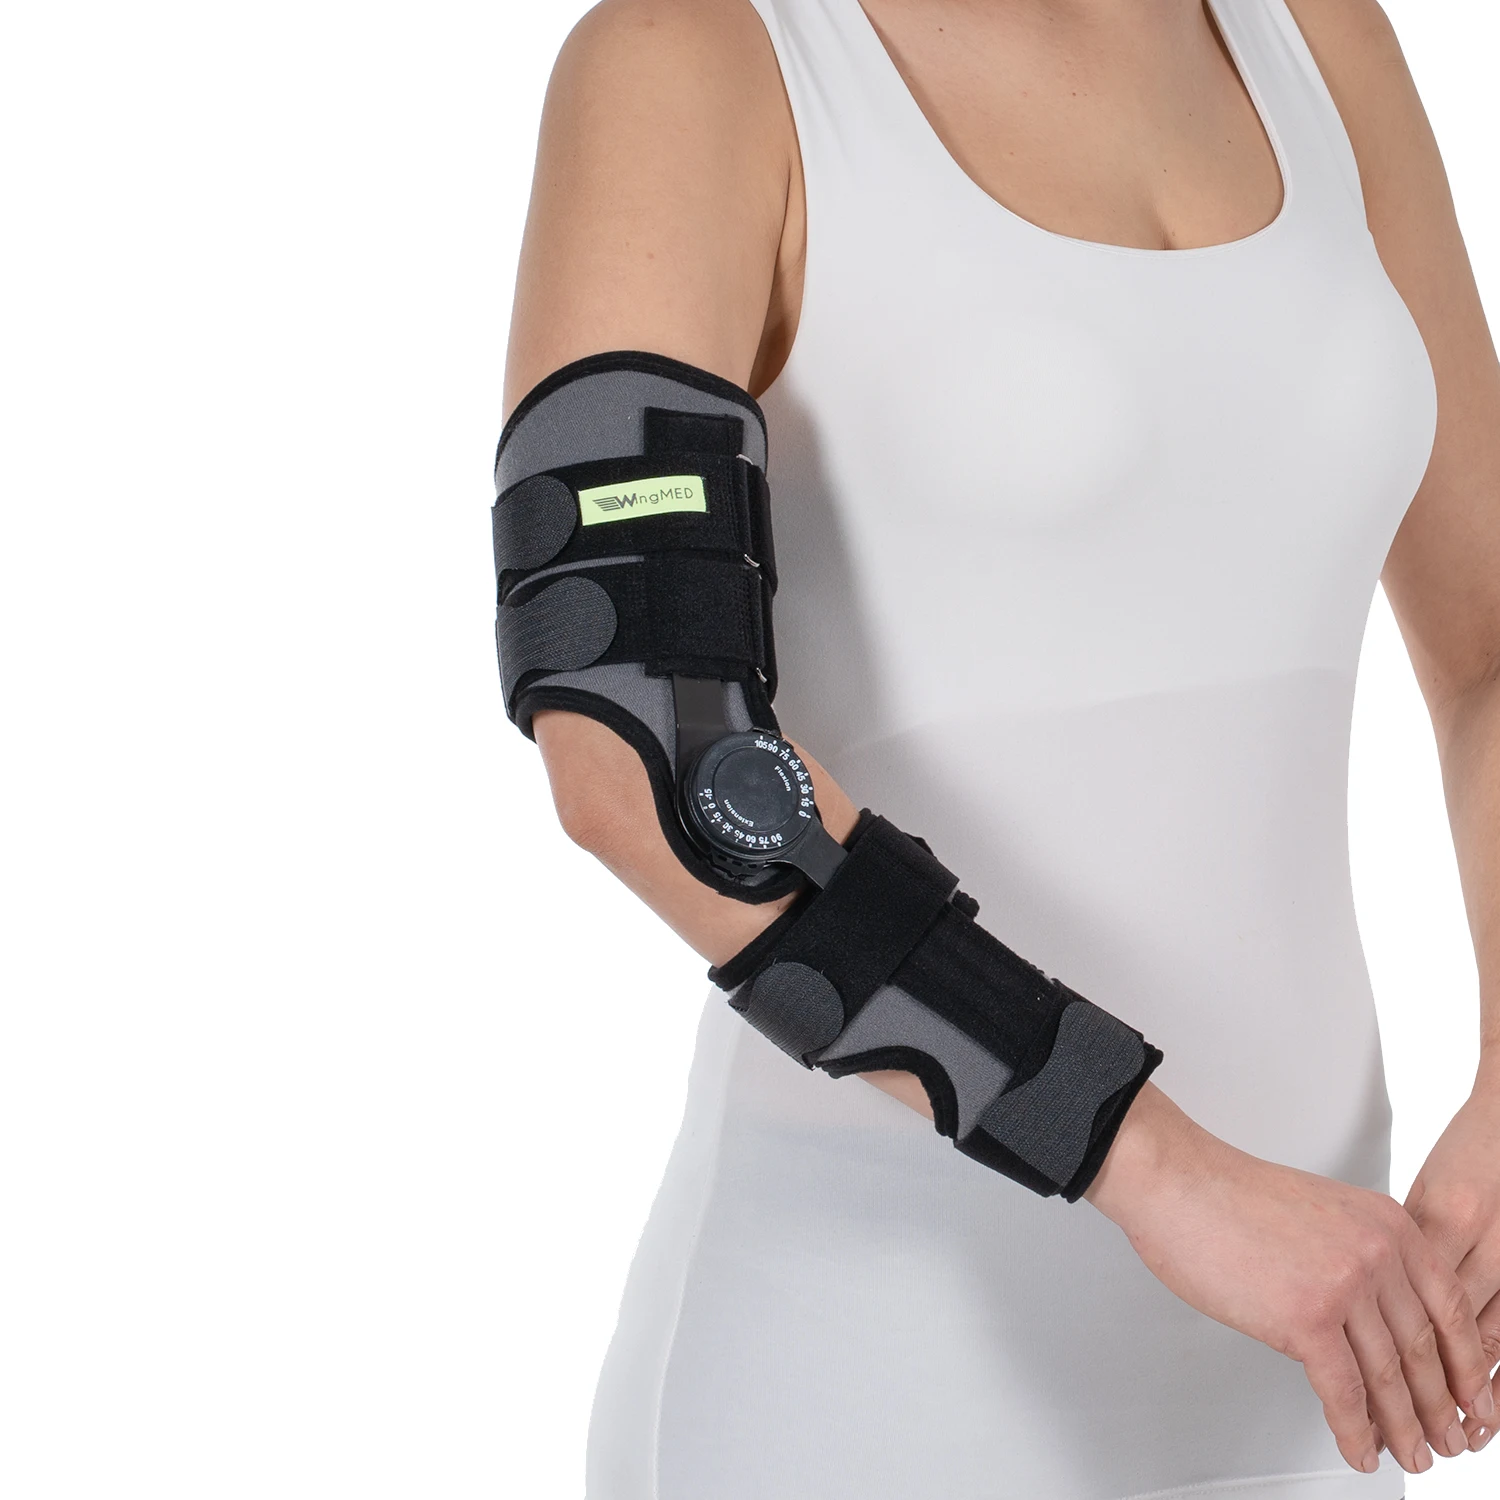 Adjustable Elbow Contracture Splint Elbow Fracture Immobilizer Protector for Ulnar Nerve Injuries Stabilizer Support Sleeve